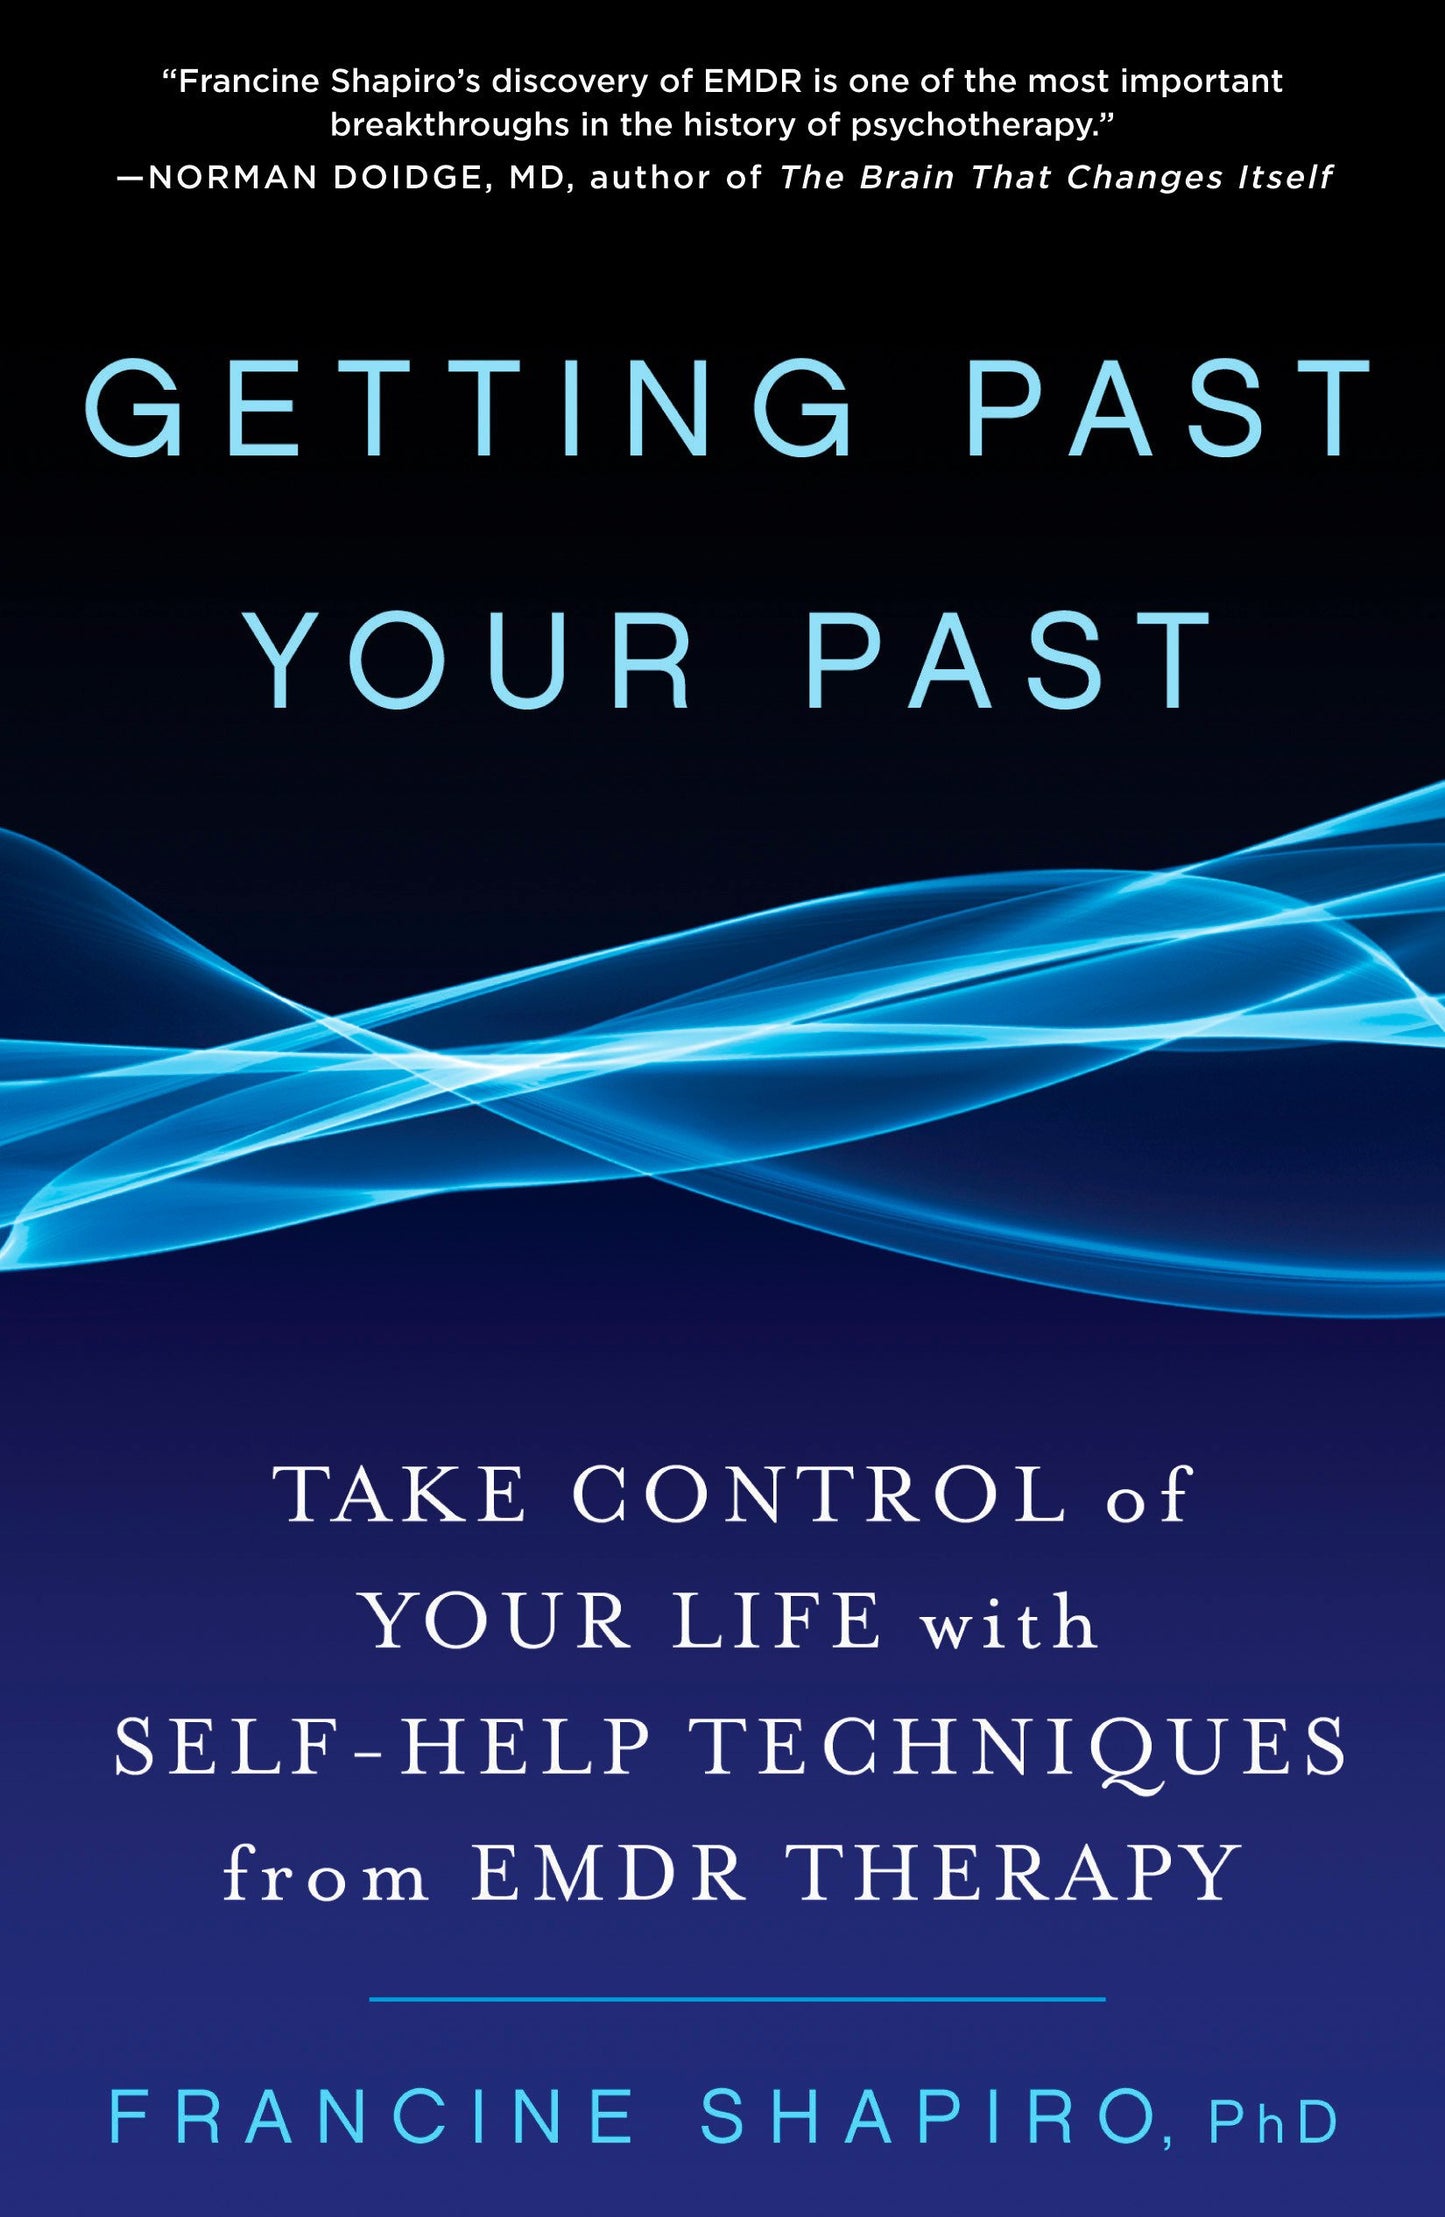 GETTING PAST YOUR PAST - SHAPIRO, F. - PAPERBACK